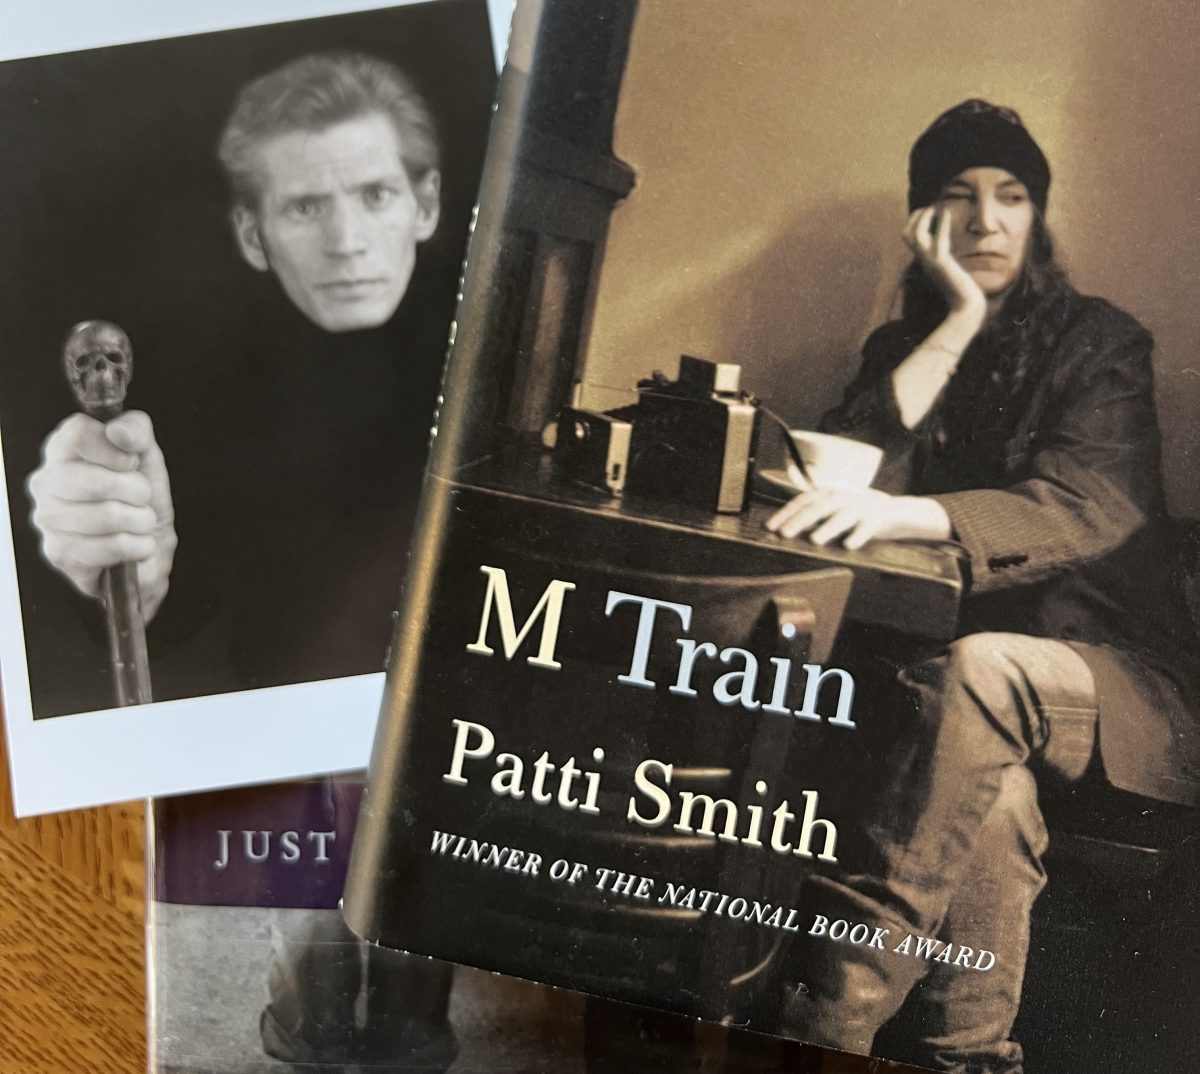 Just Kids and M Train by Patti Smith